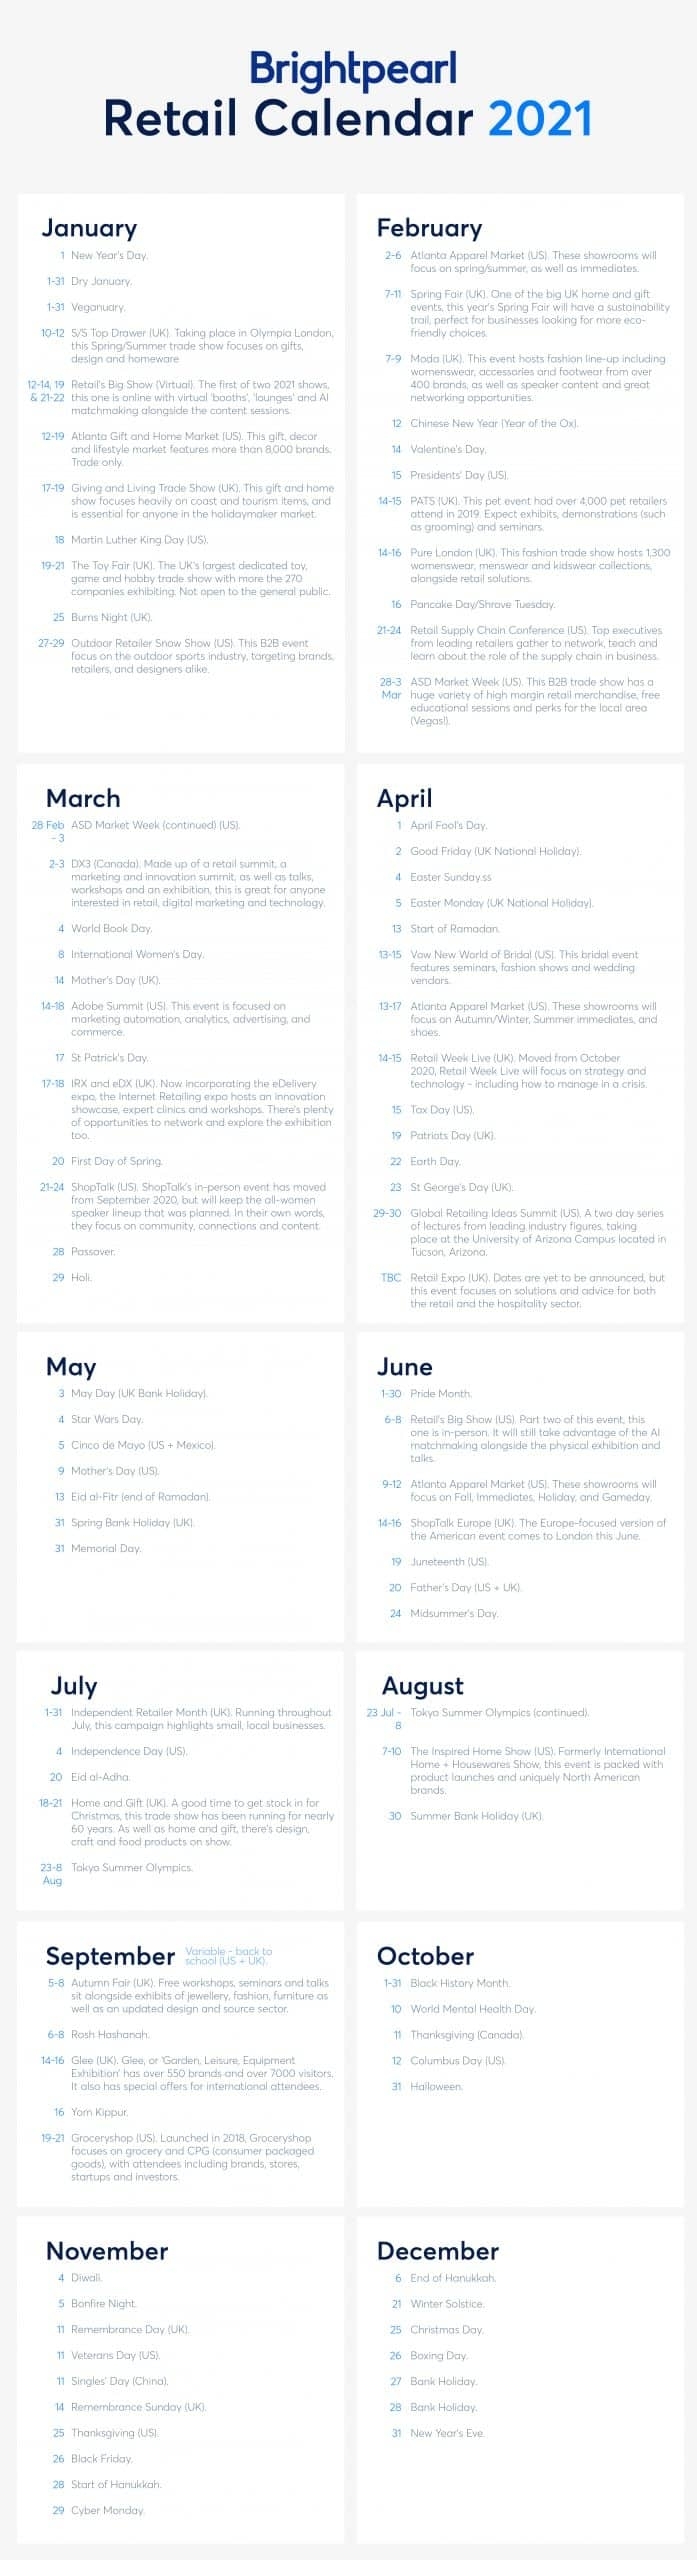 The 2020 And 2021 Retail Calendar: Key Dates You Need To